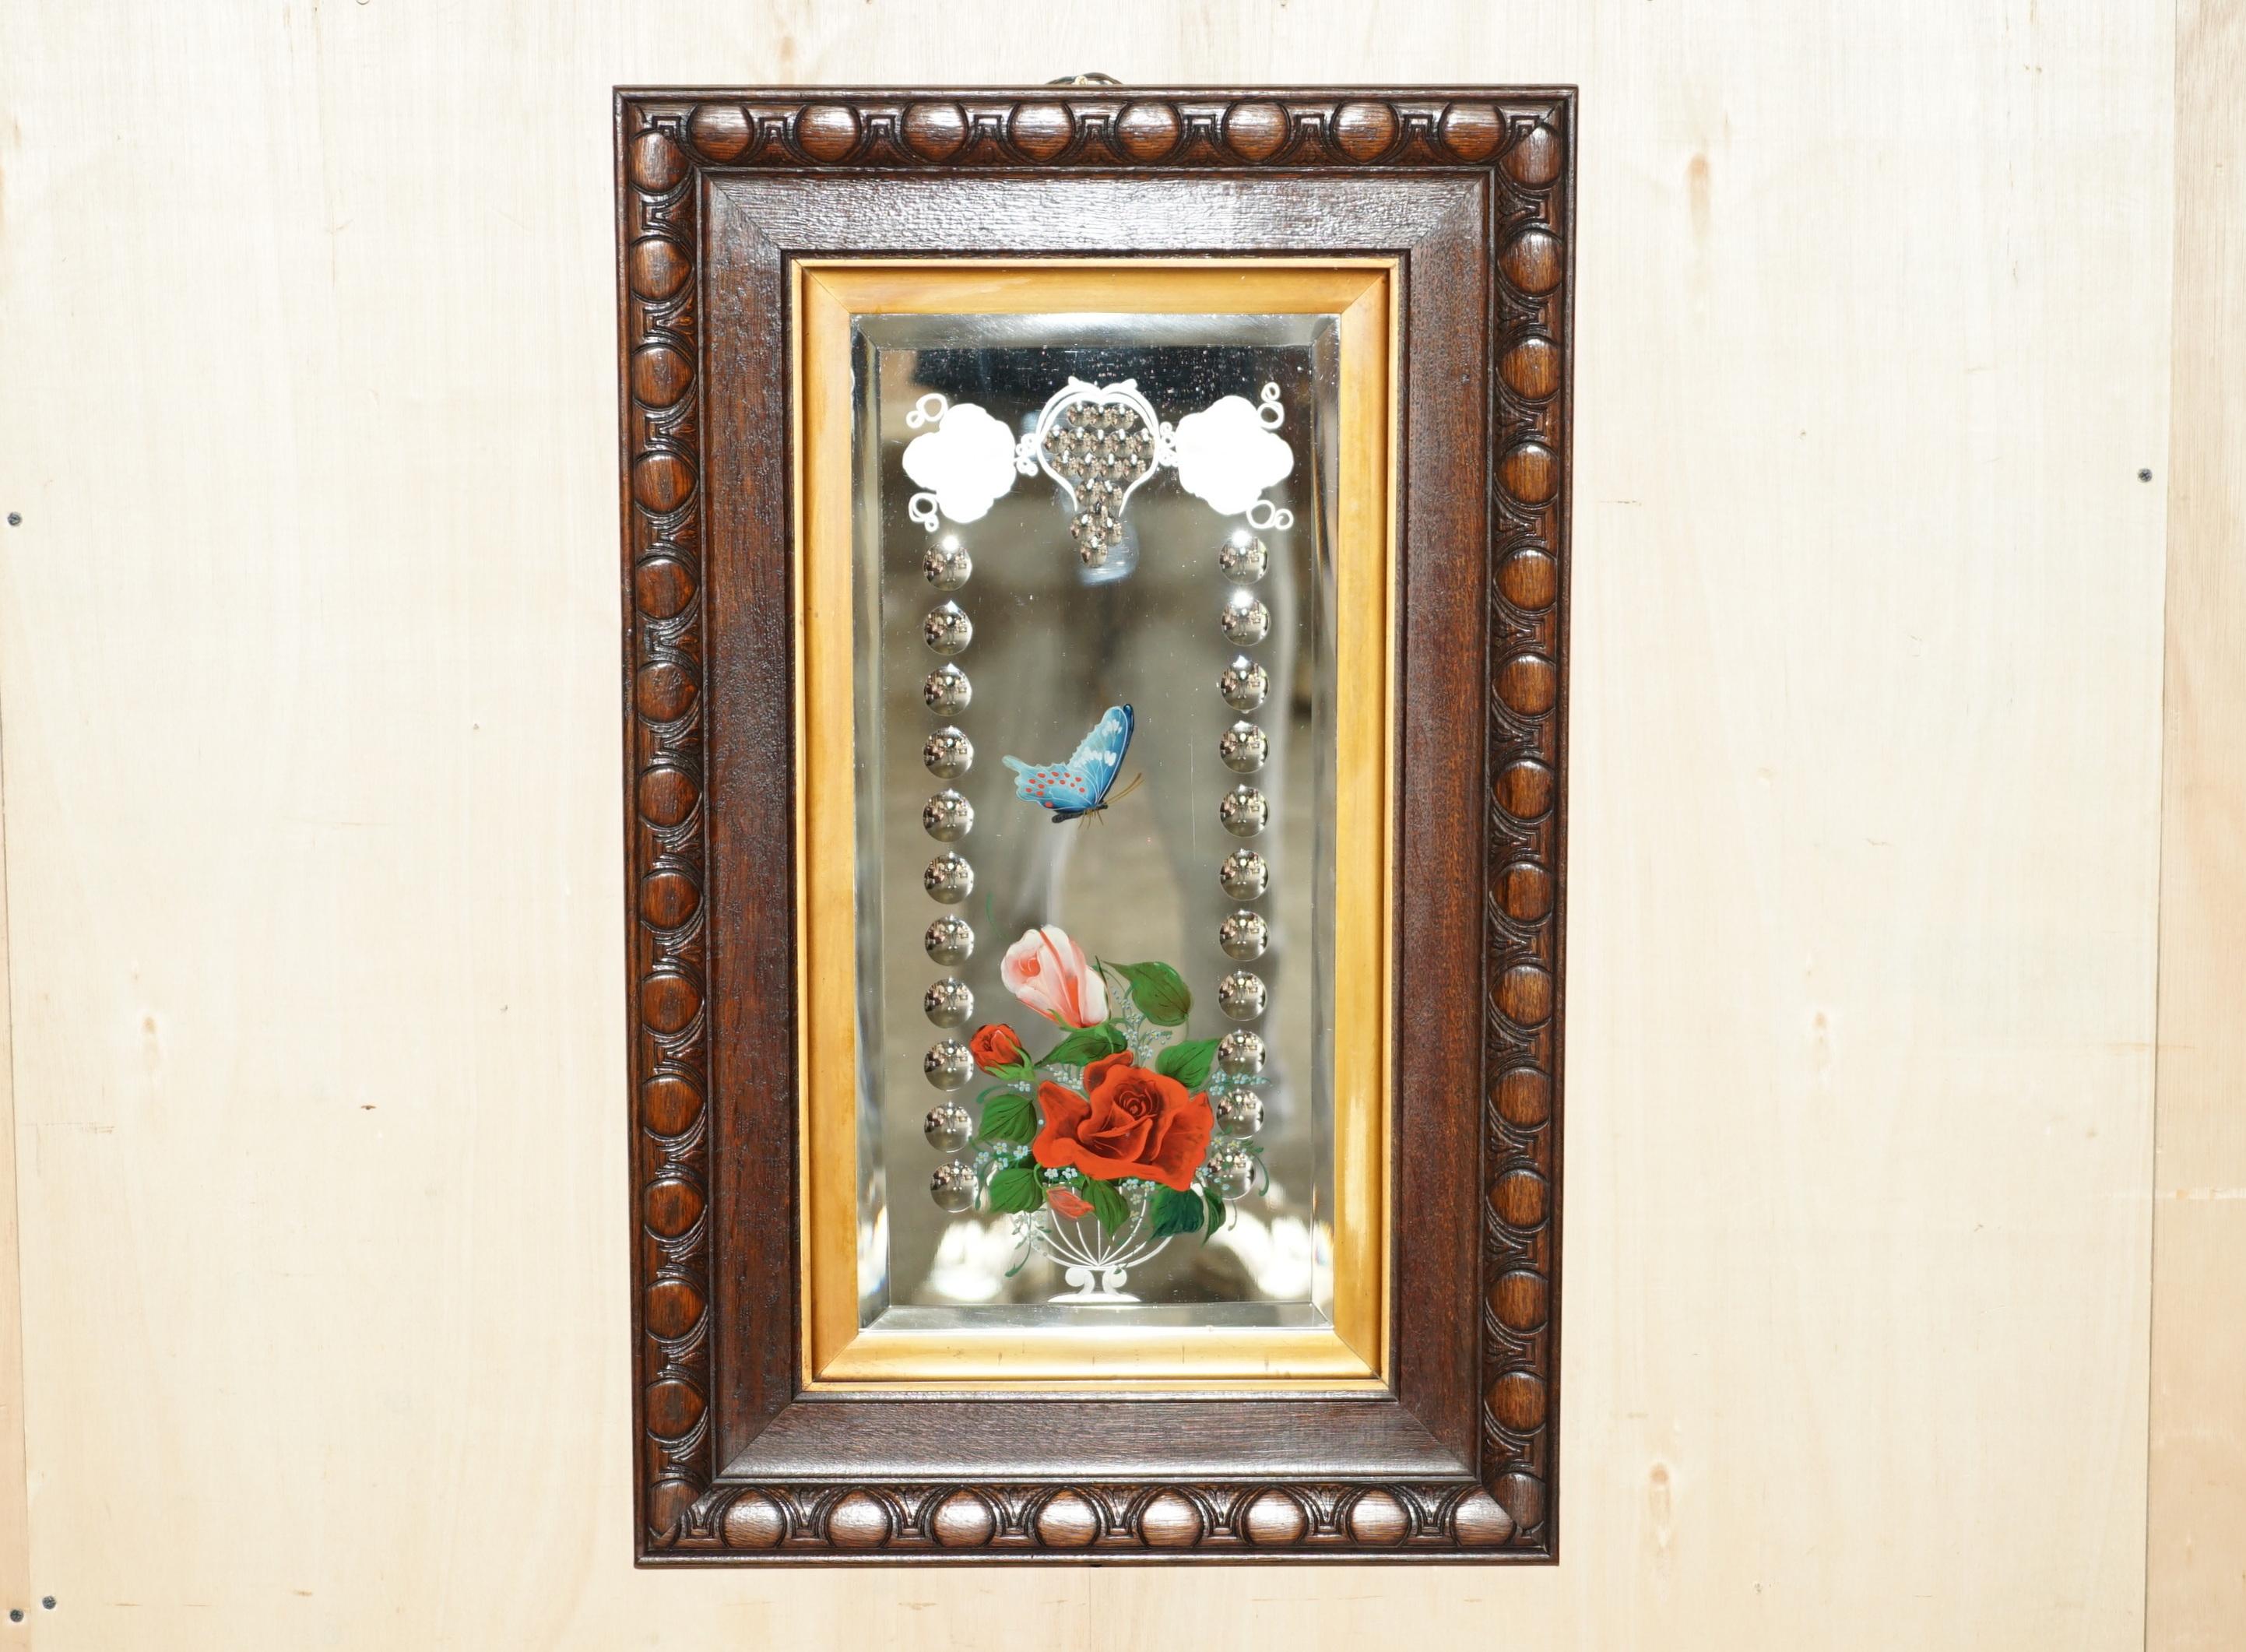 Royal House Antiques

Royal House Antiques is delighted to offer for sale this very unique pair of reverse bevelled and painted Italian floral mirrors

Please note the delivery fee listed is just a guide, it covers within the M25 only for the UK and